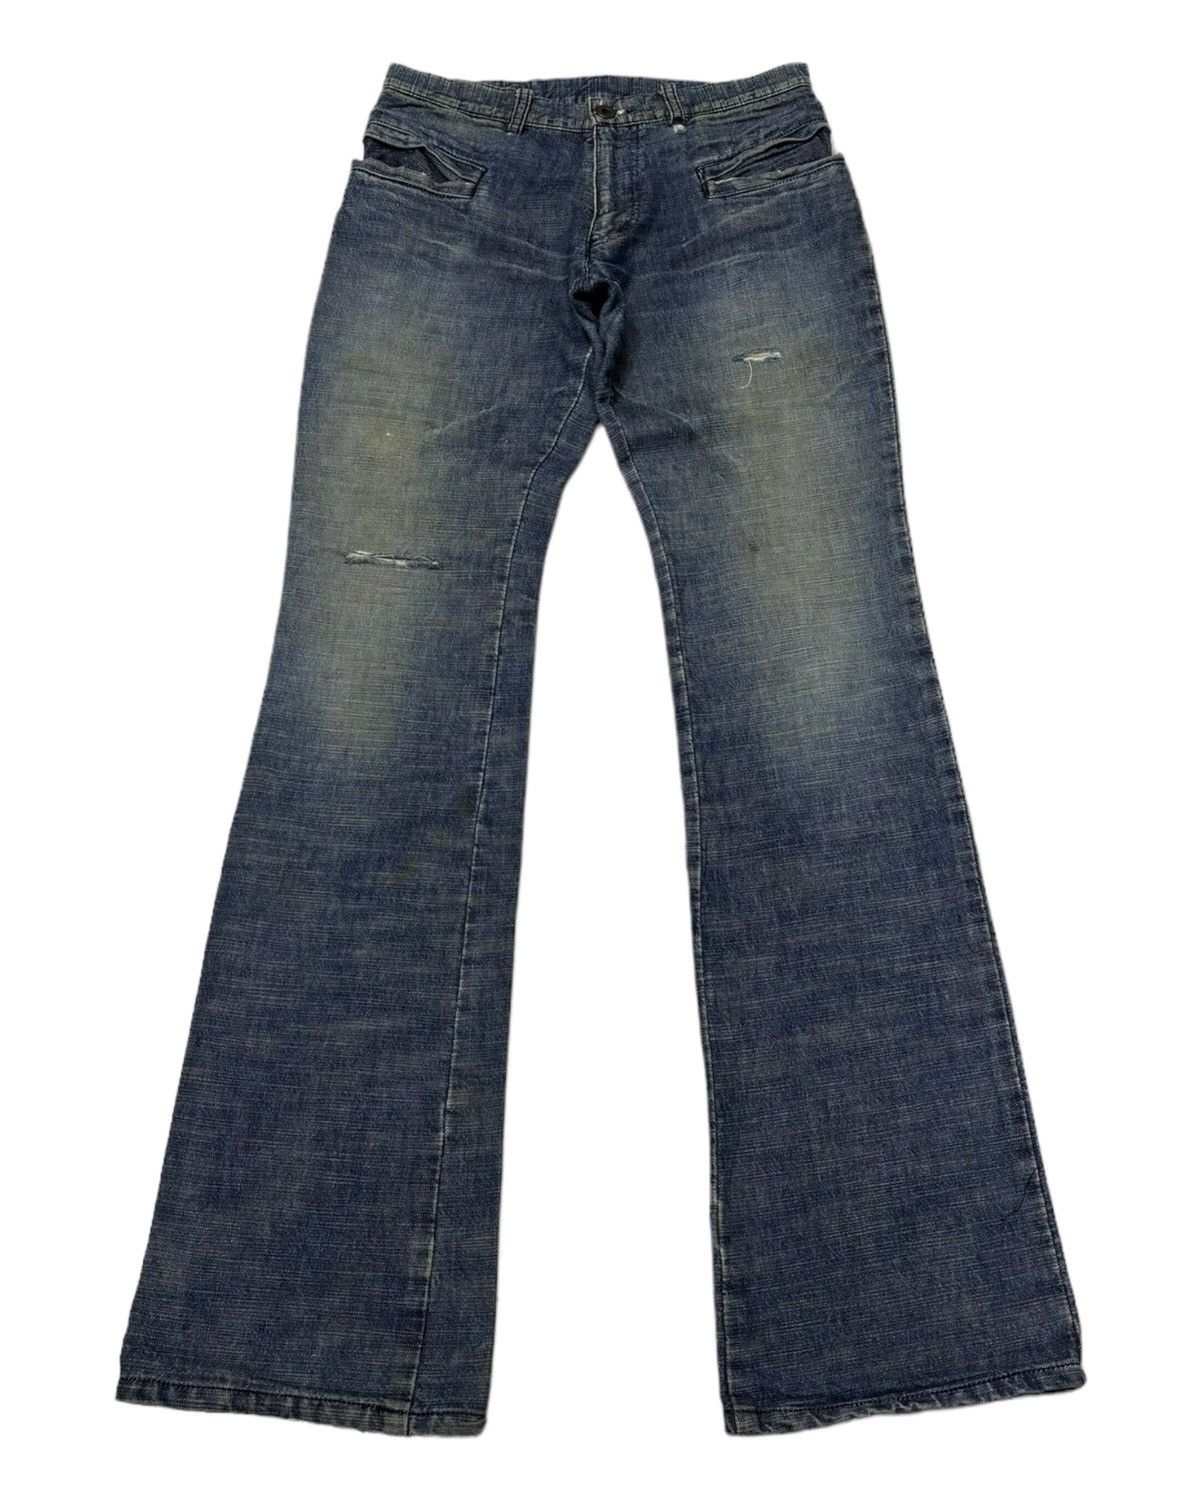 Archival Clothing - 🔥ARCHIVE L7 REAL HIP JAPANESE FLARED DENIM BOOTCUT JEANS - 2